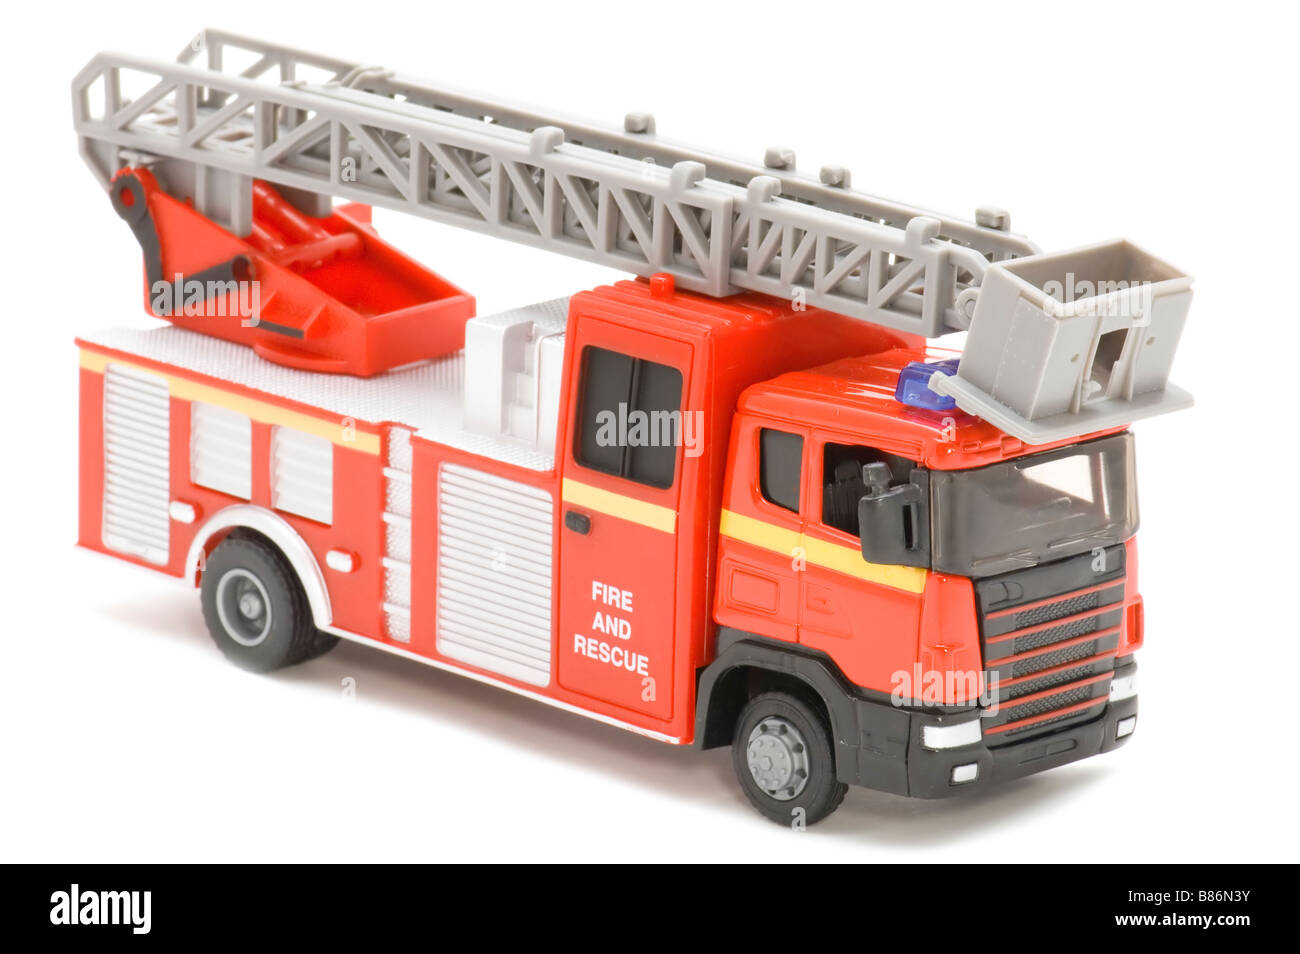 object on white toy fire fighting vehicle Stock Photo